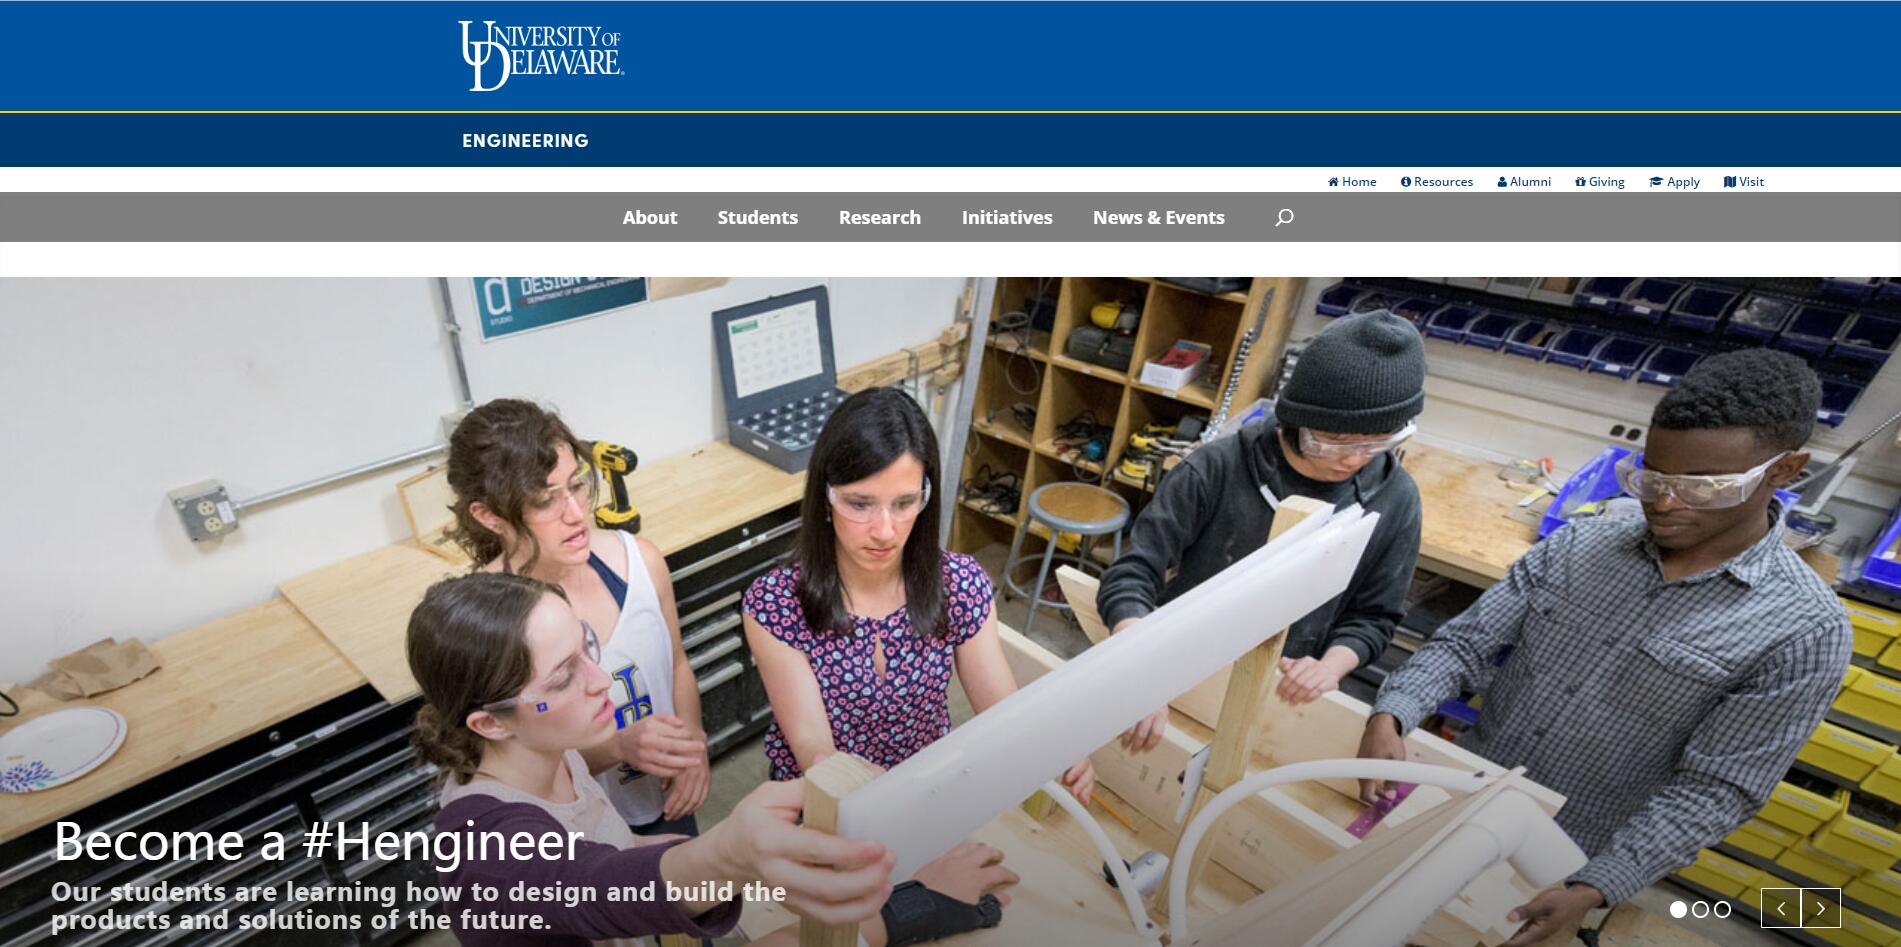 The College of Engineering at University of Delaware